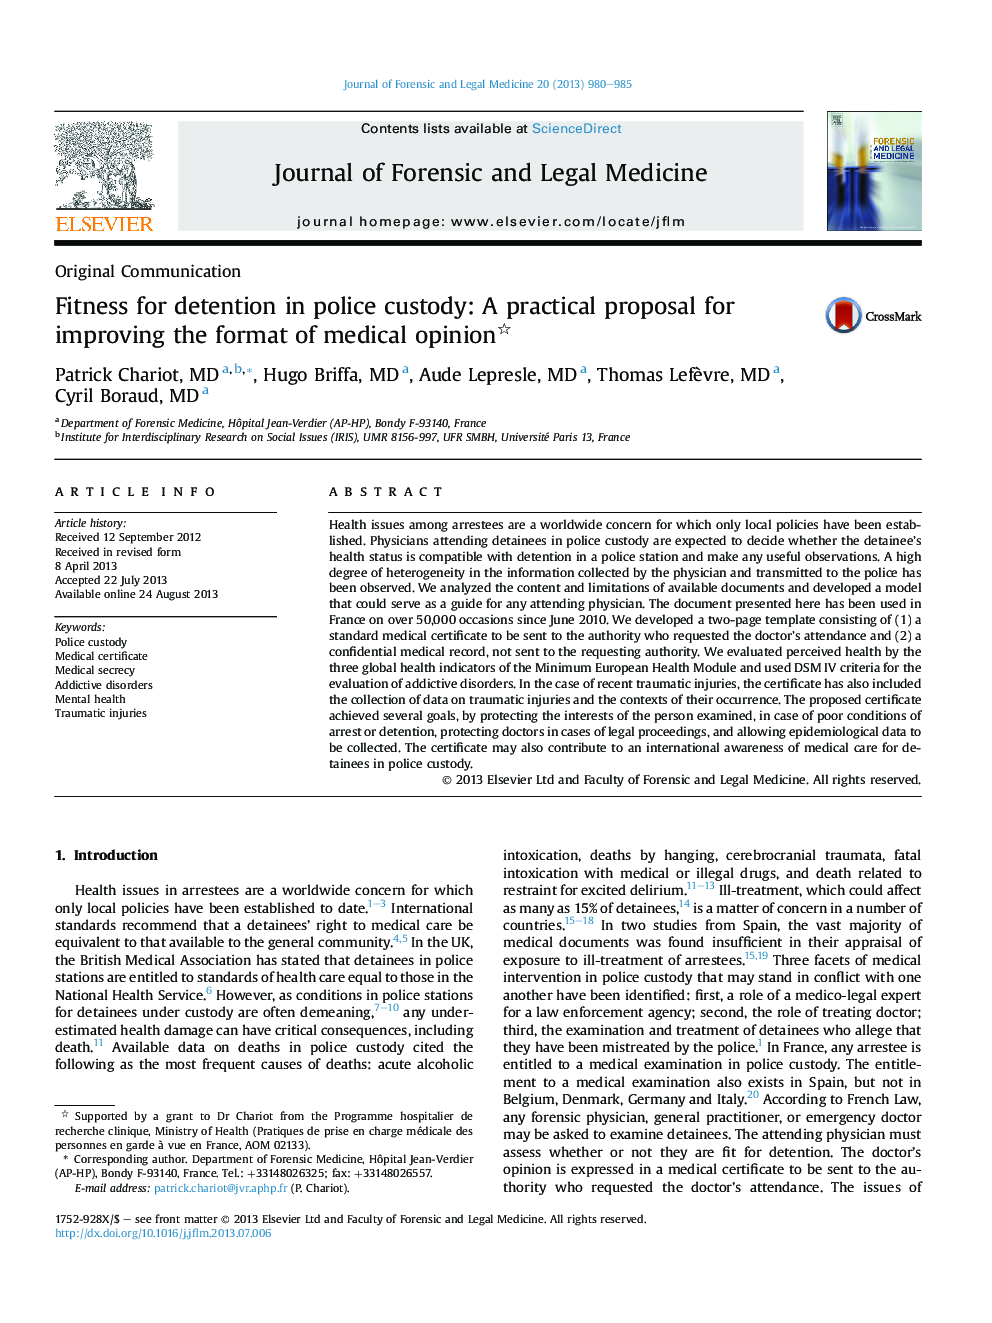 Fitness for detention in police custody: A practical proposal for improving the format of medical opinion 